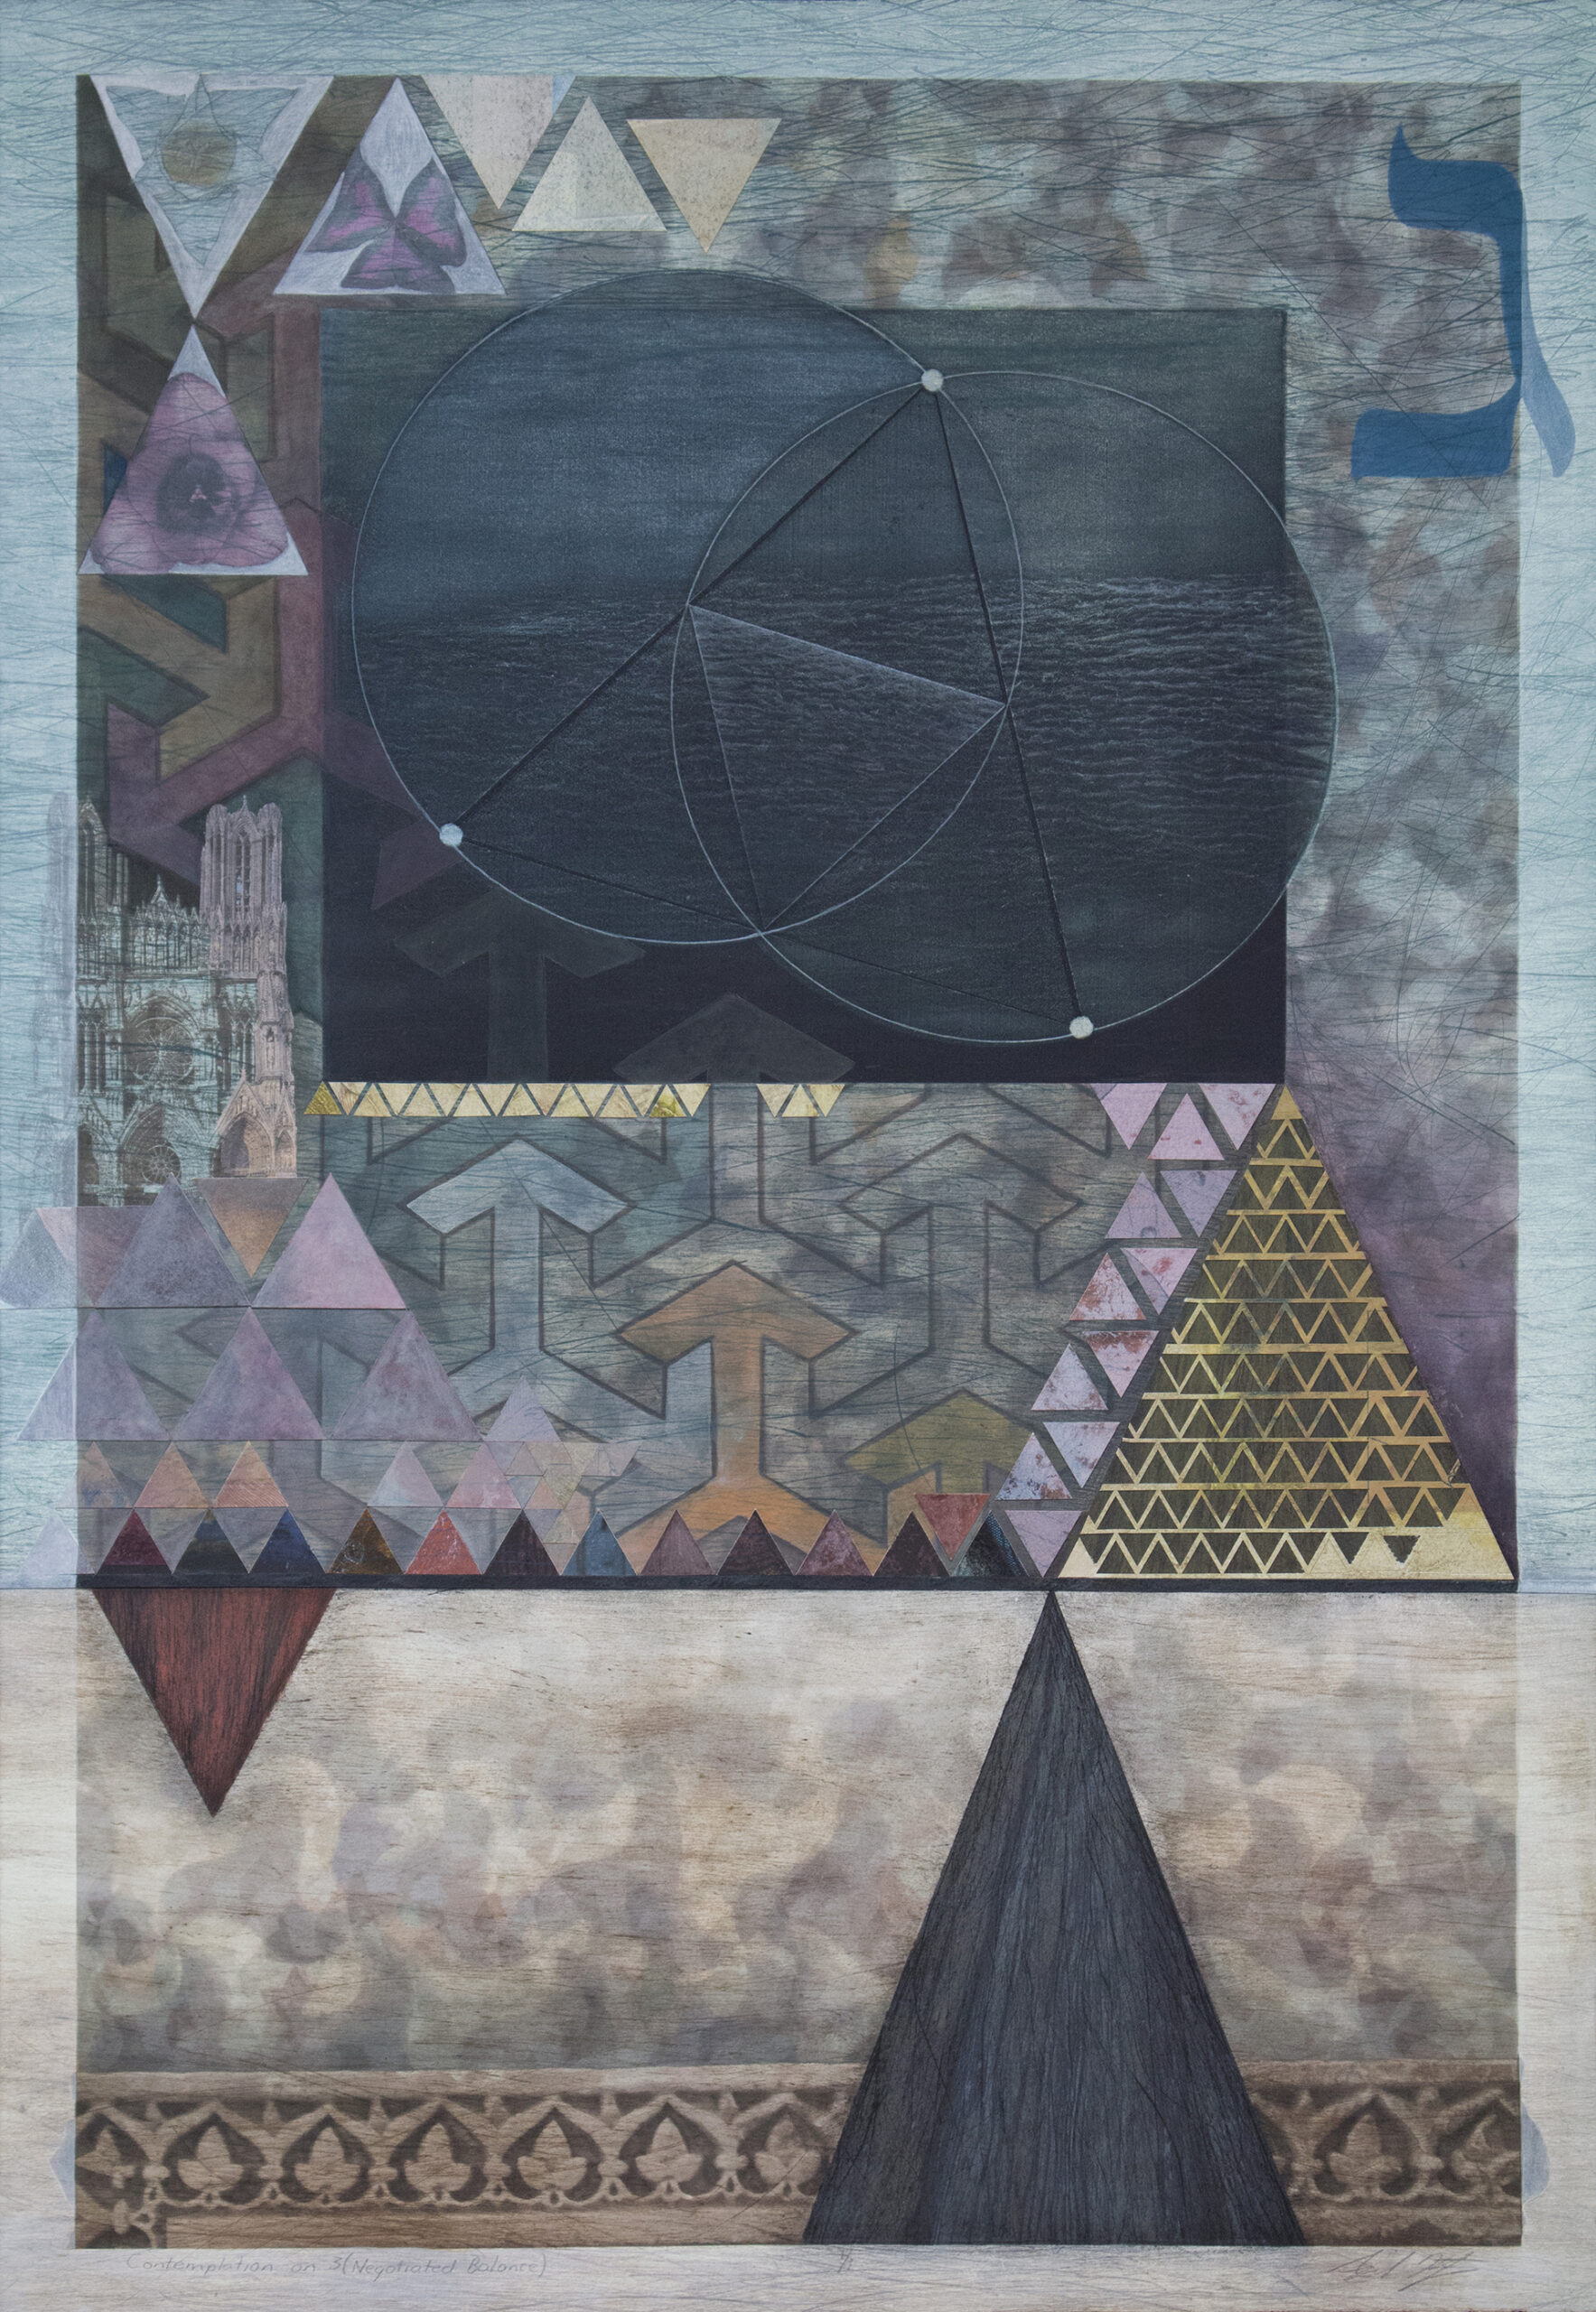 Contemplation on 3 (Negotiated Balance); pigmented ink jet print, etching, drypoint, aquatint, collagraph, collage, paint, pencil; 30” x 20.5”; 2019 A complex composition filled with geometric pattern and cultural references to the number 3 fill the page.